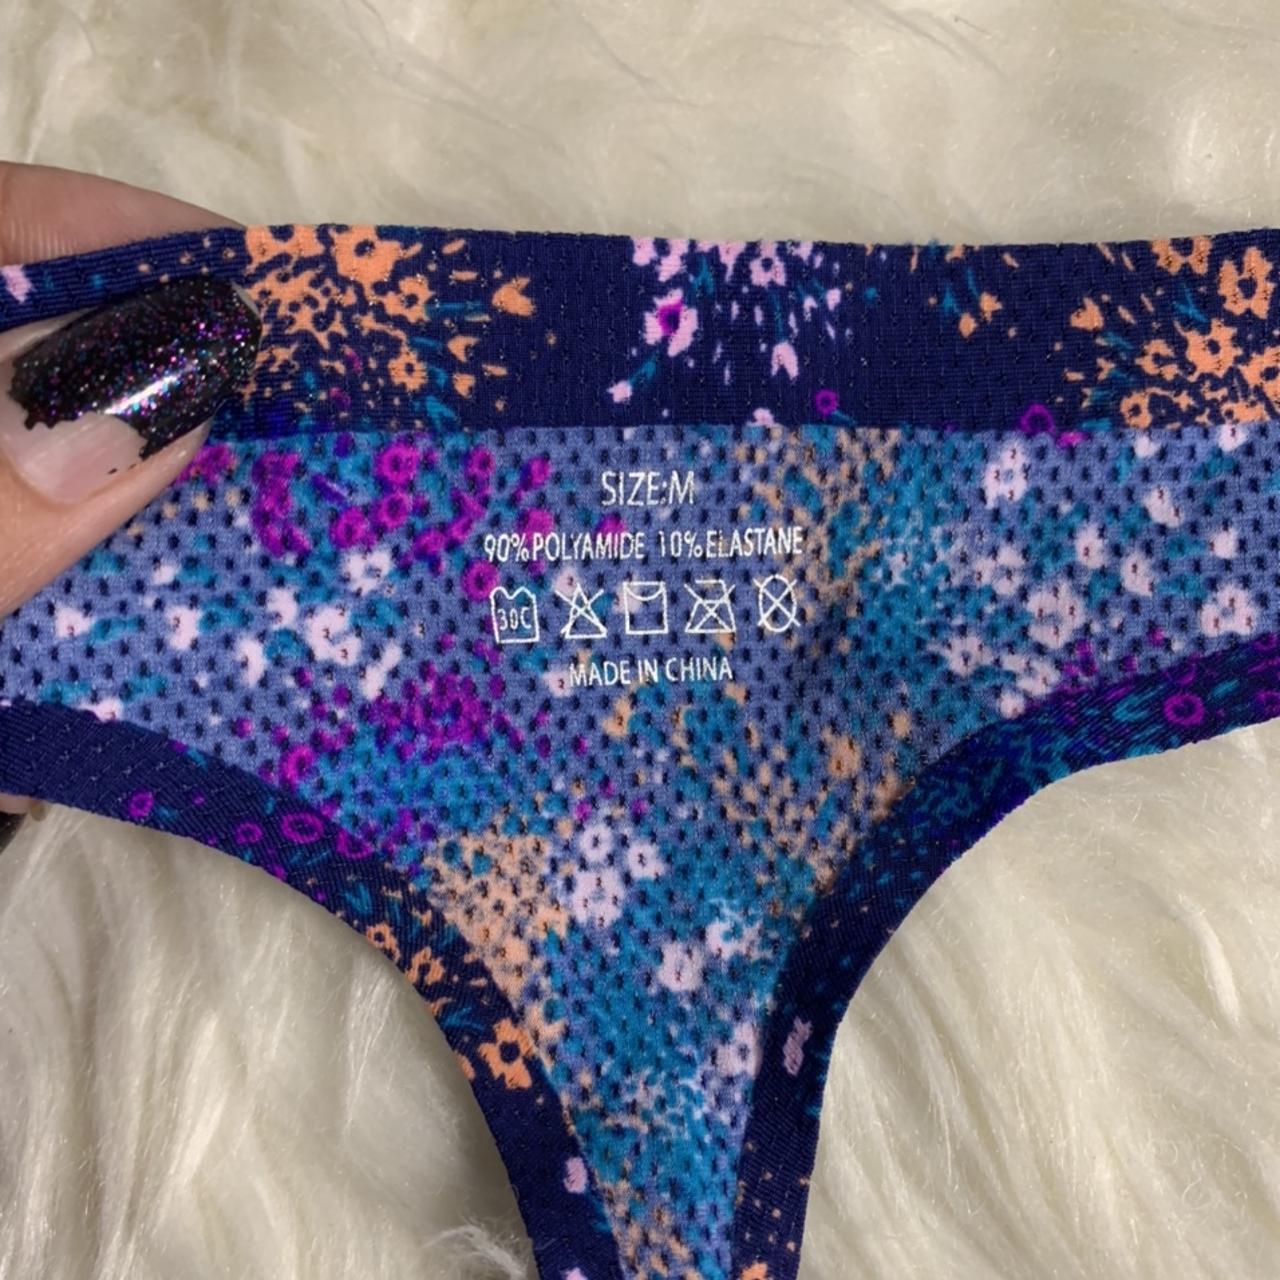 Product Image 3 - Navy blue floral print thong
This